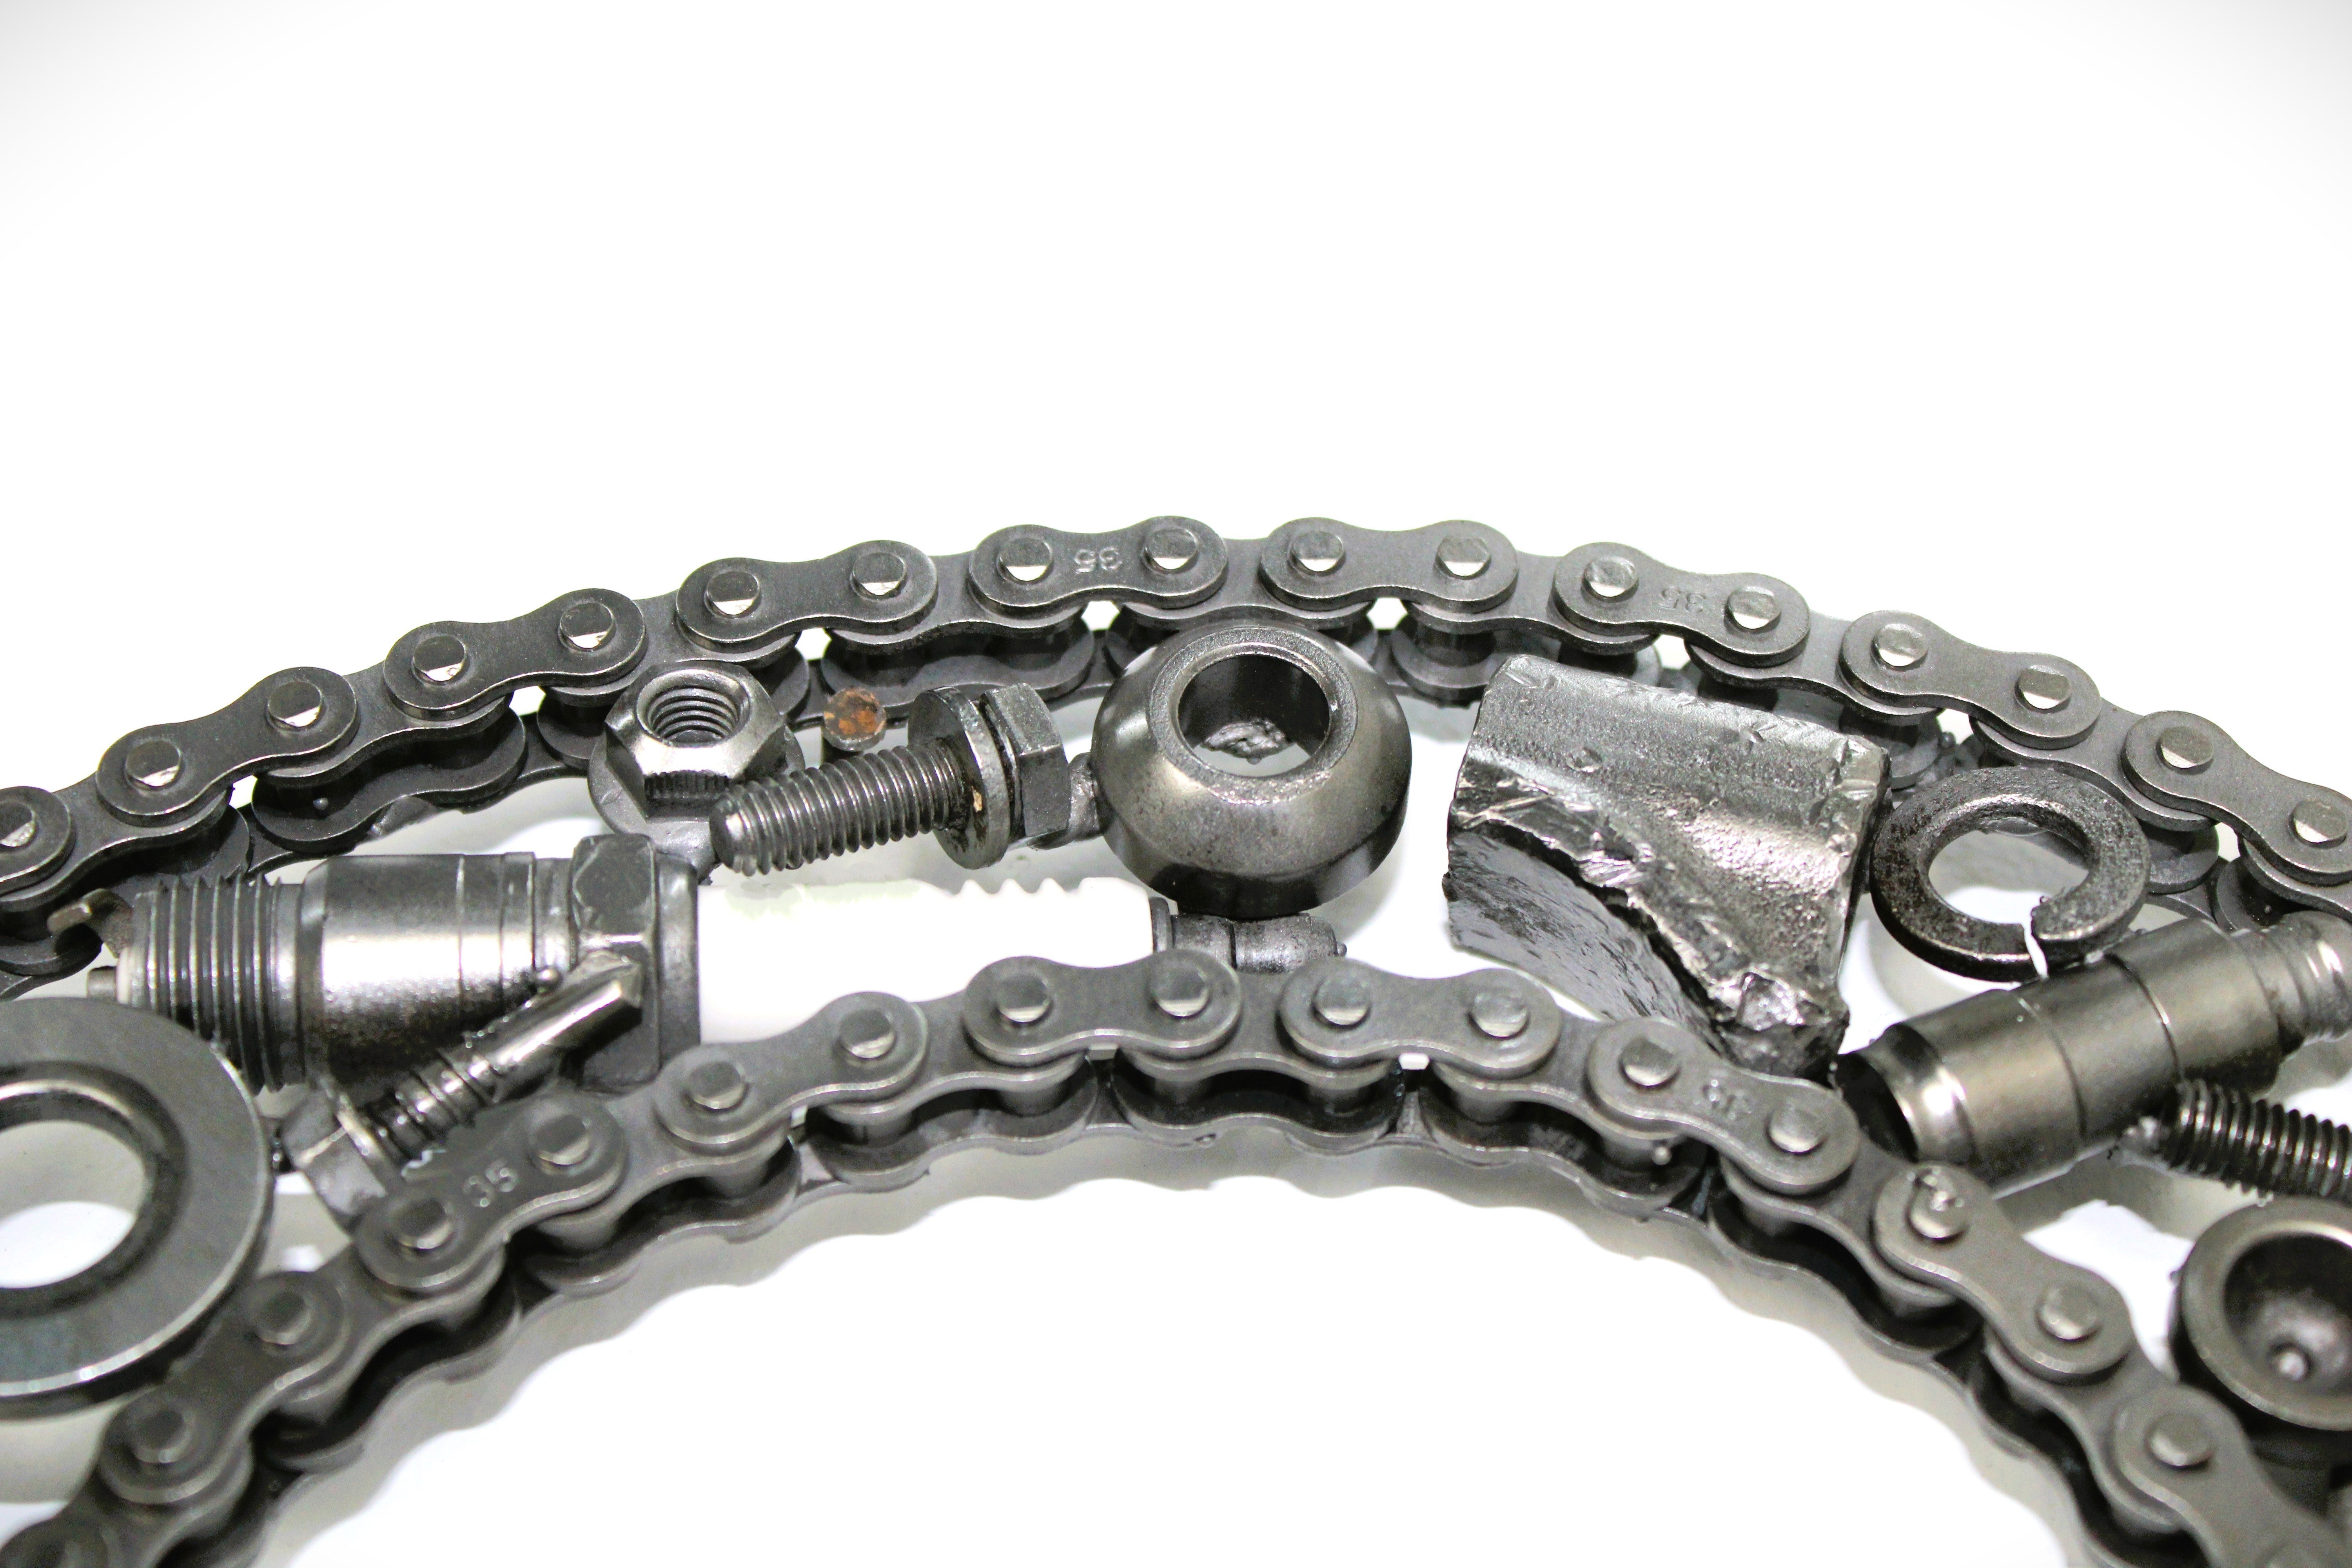 Close-up view of a letter C made out of real car parts, outlined with a timing chain.